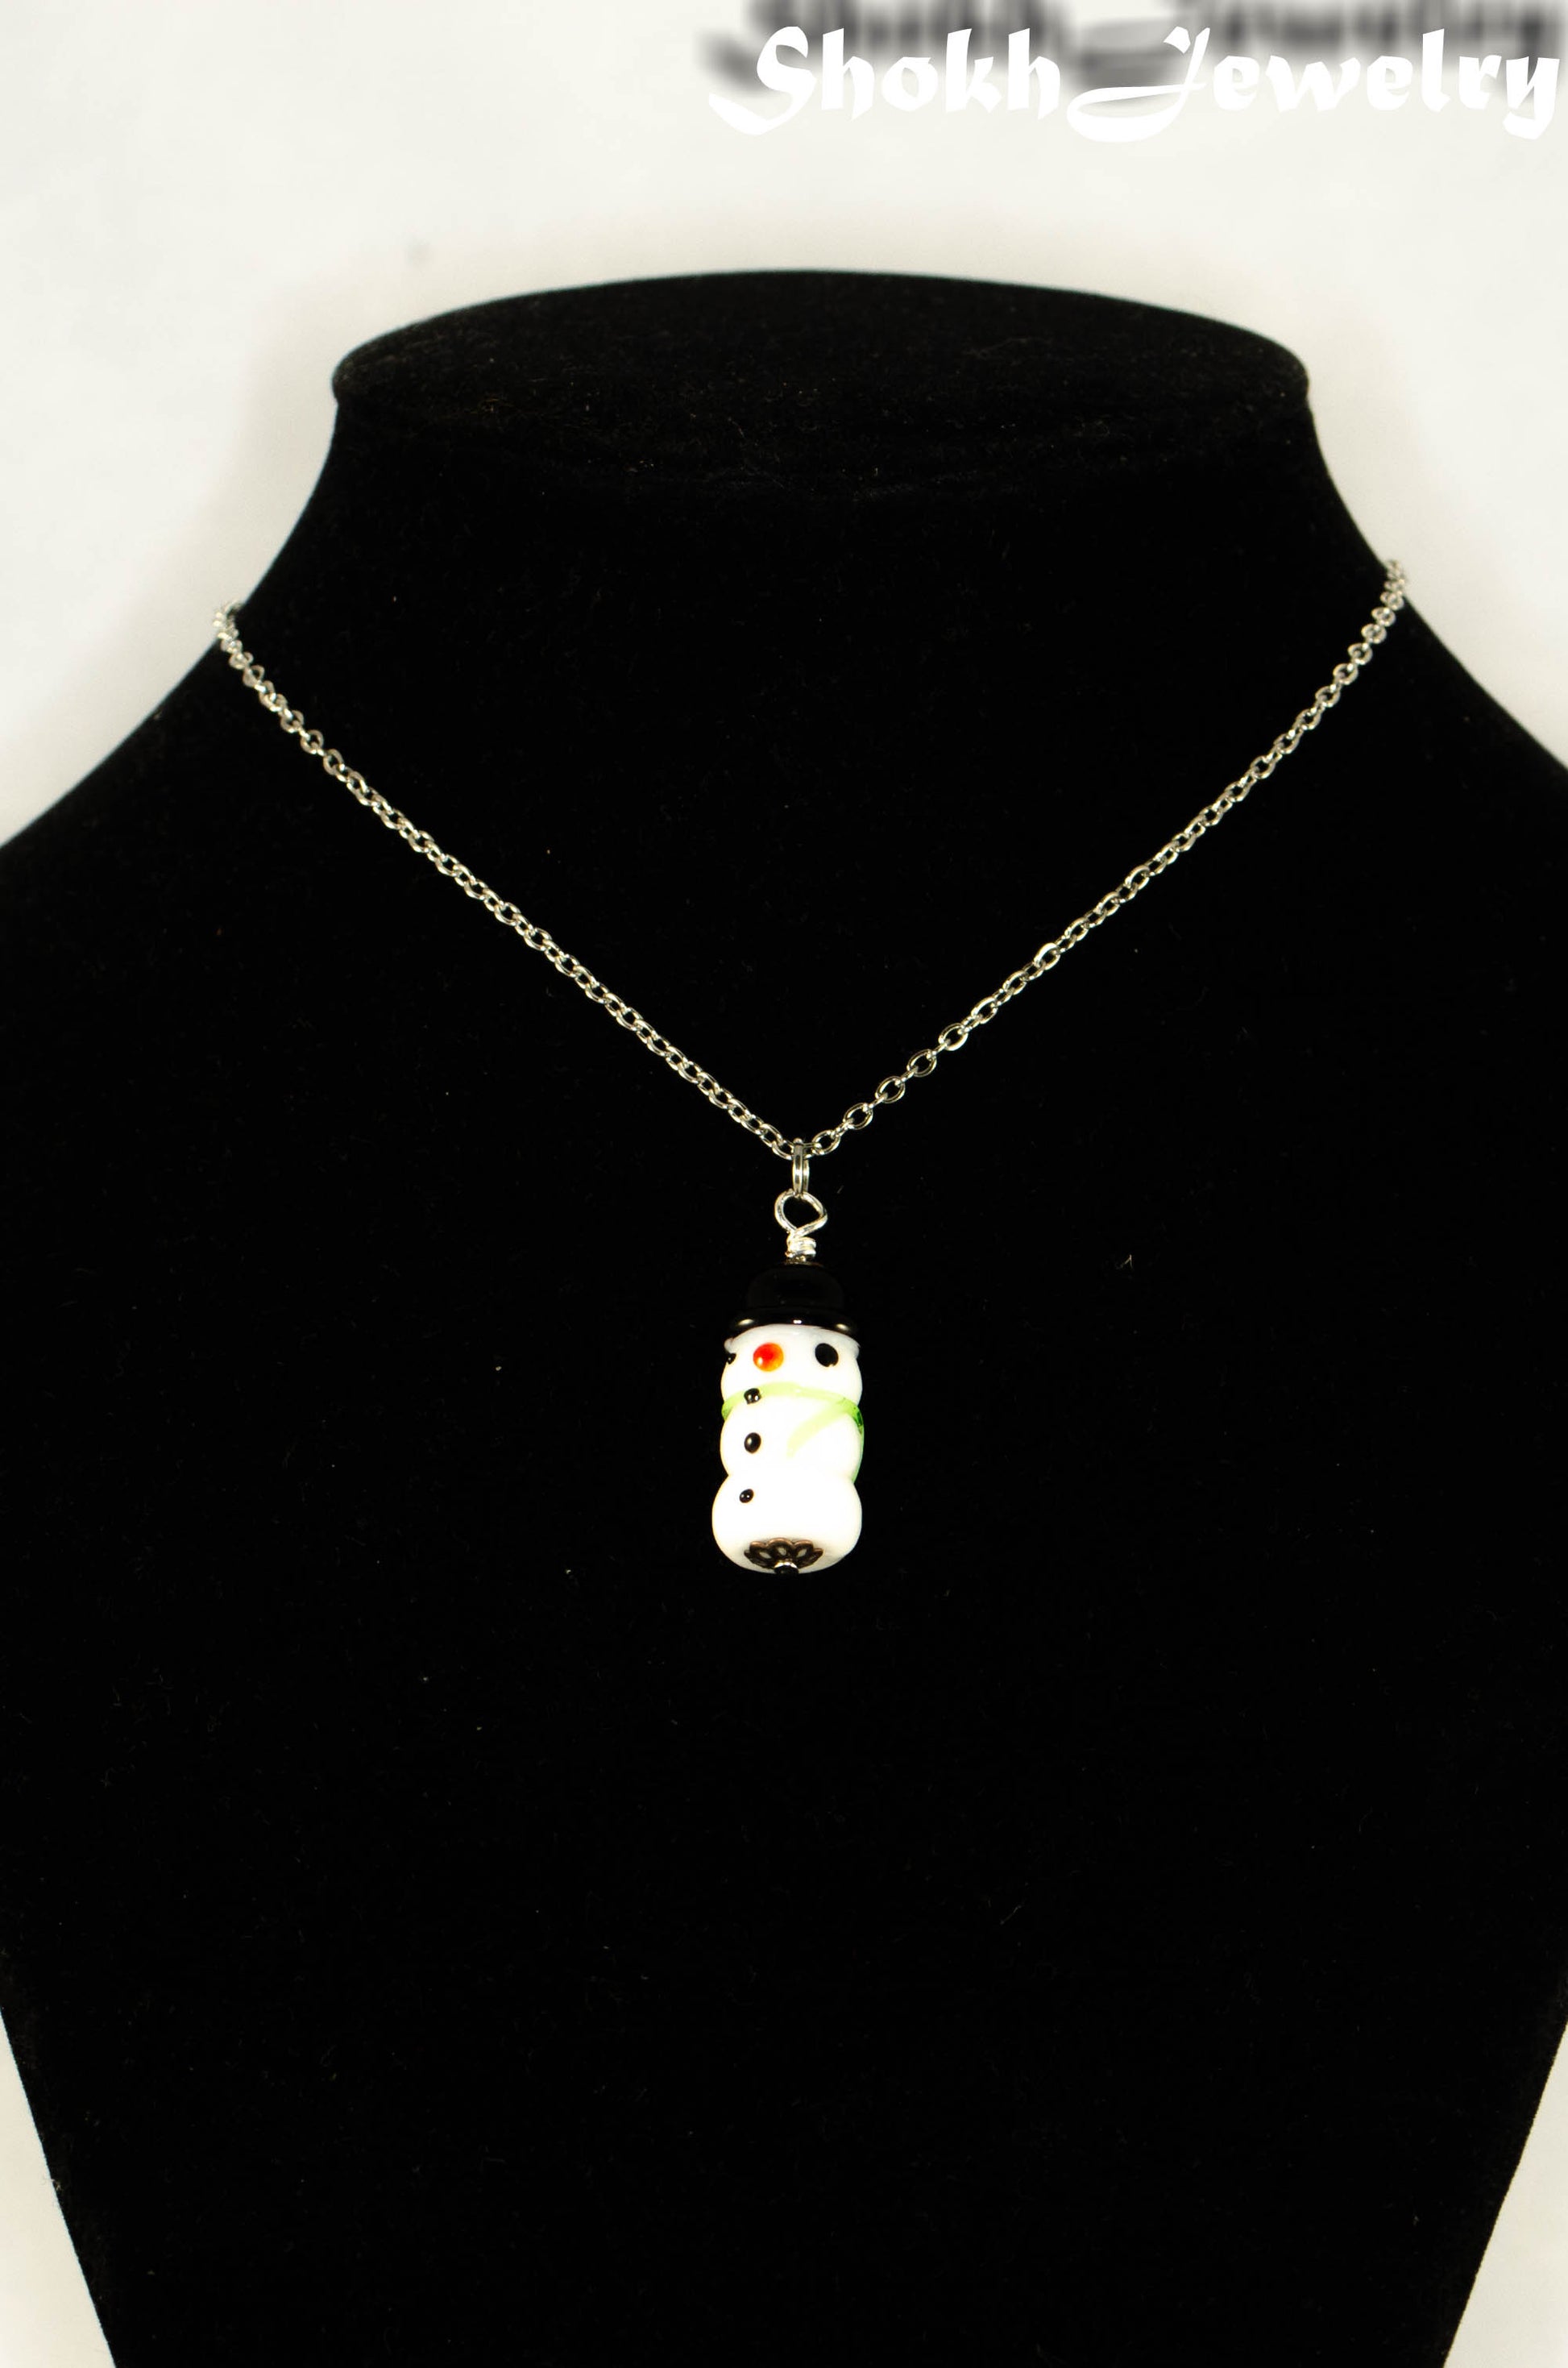 Glass Bead Snowman Pendant Necklace displayed on a bust.